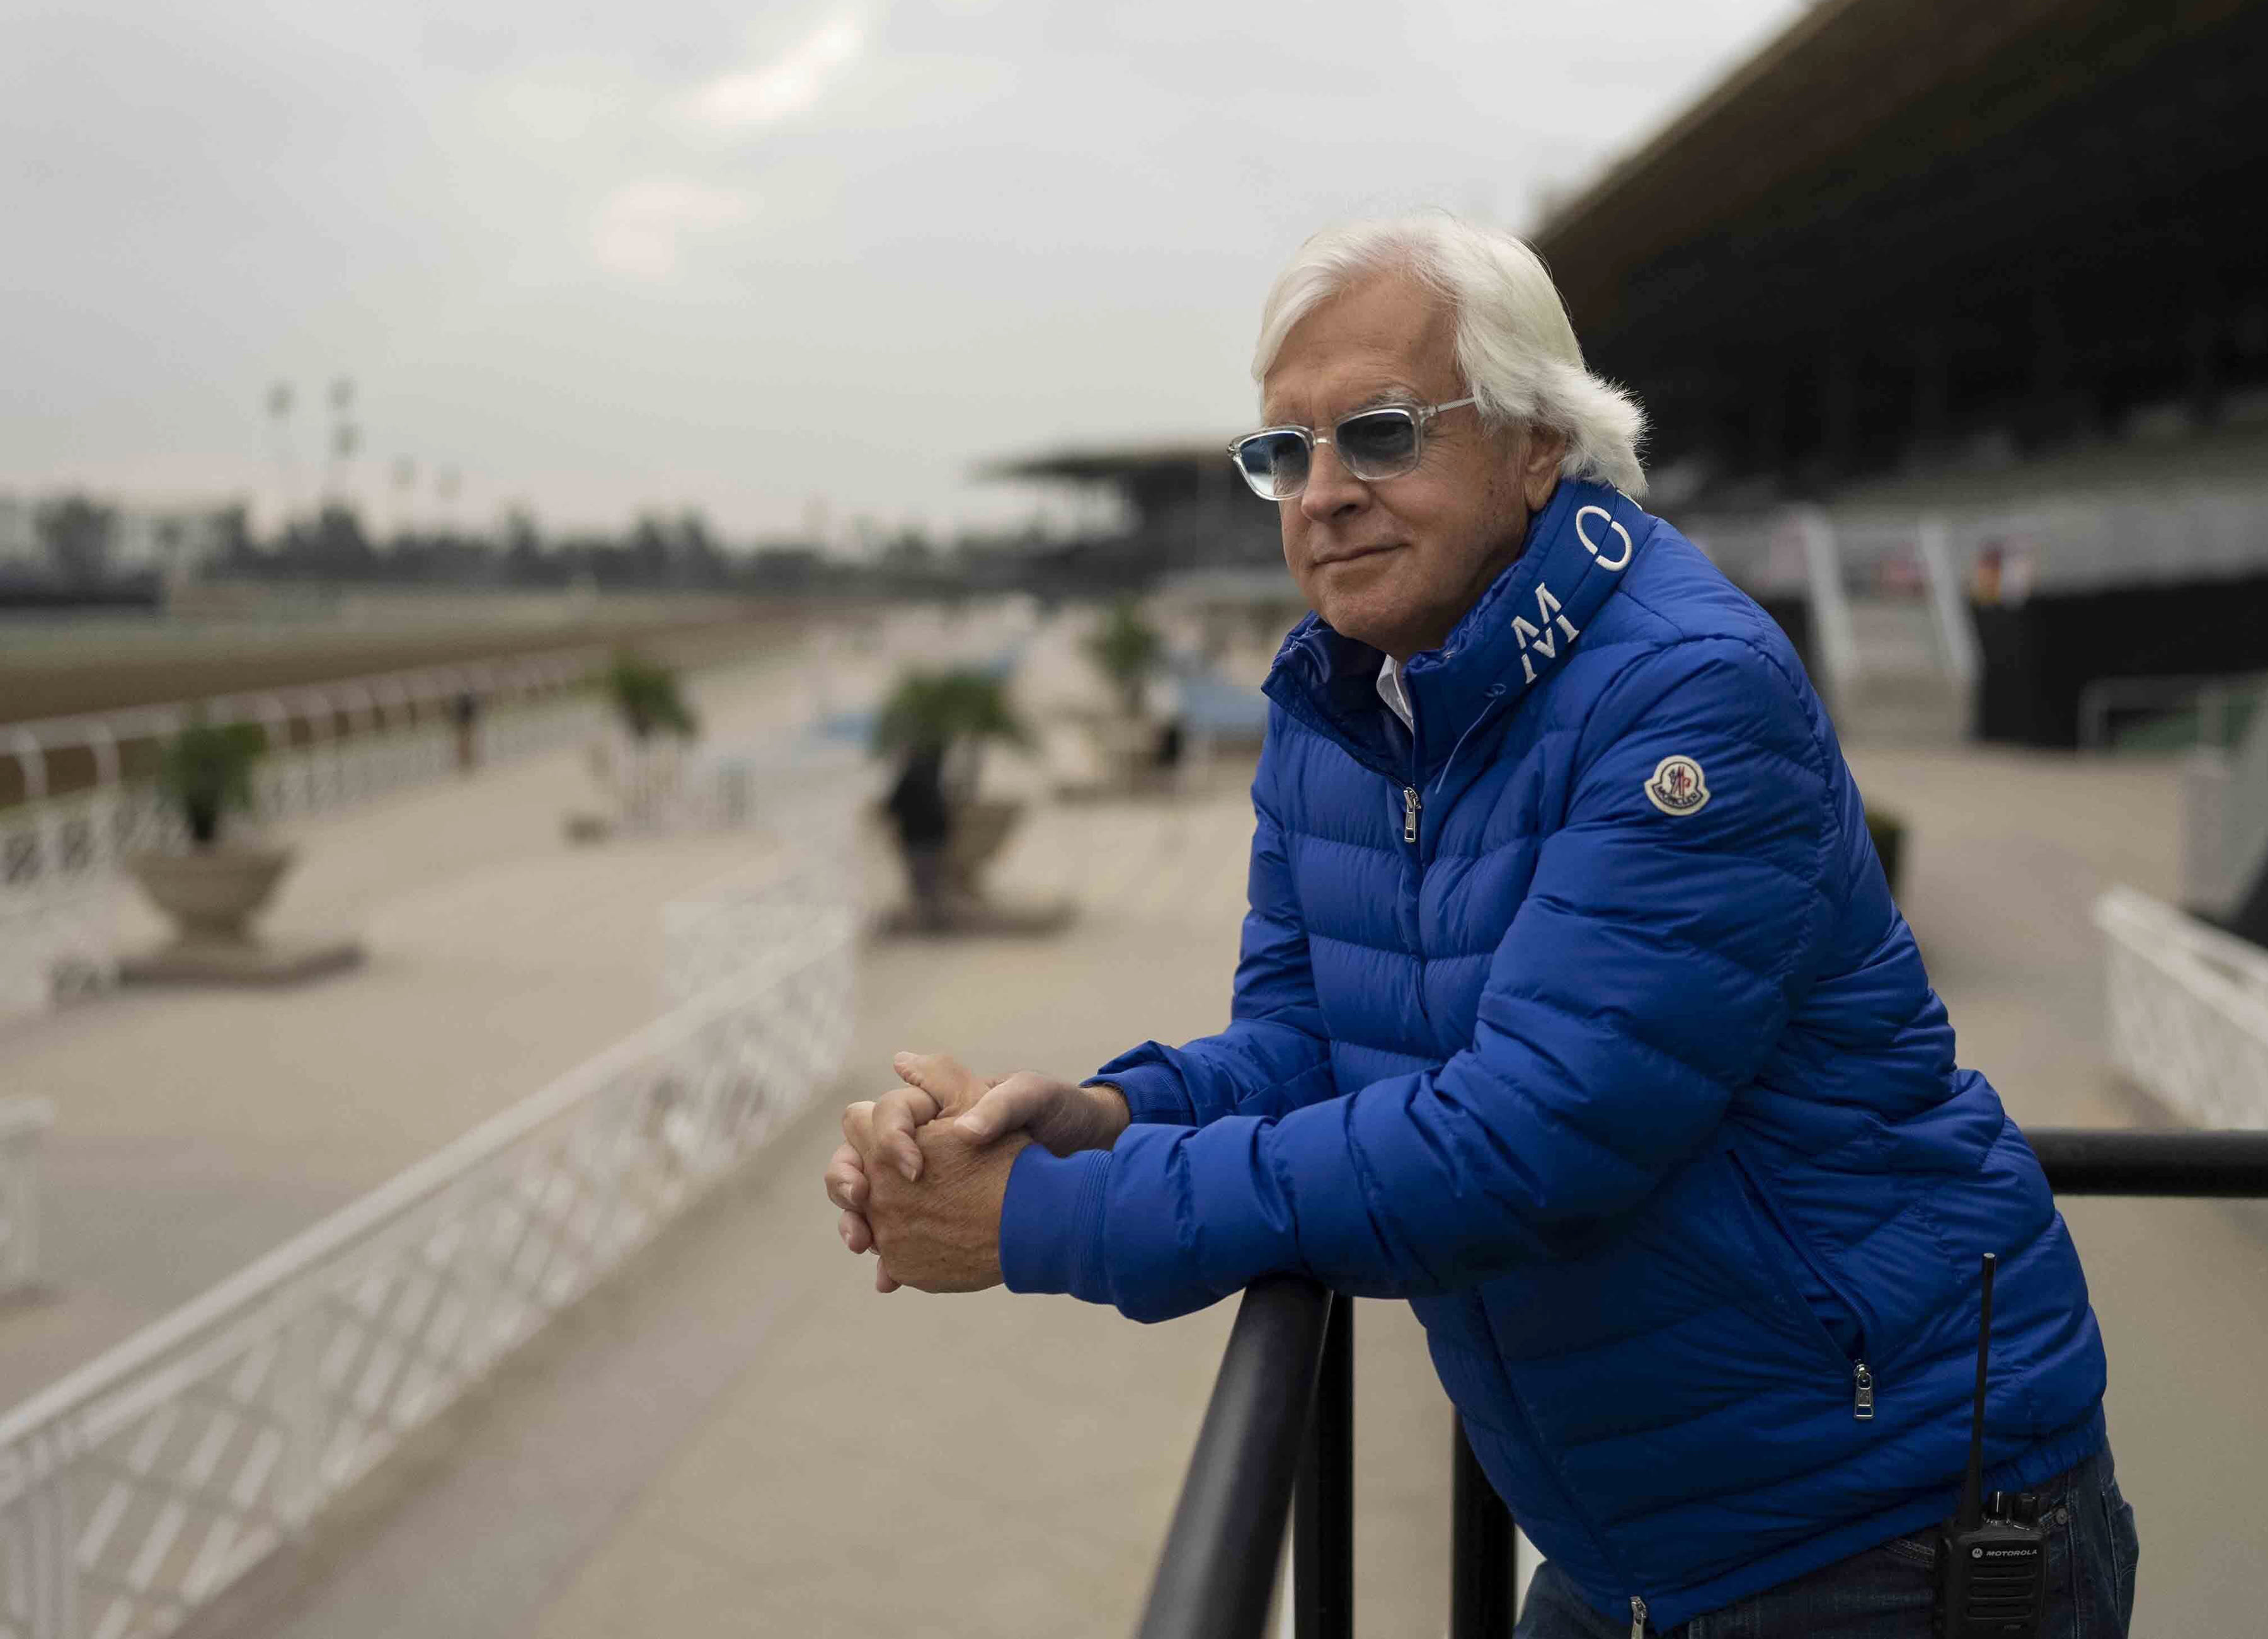 Hall of Fame racehorse trainer Bob Baffert has suspension rescinded by Churchill Downs